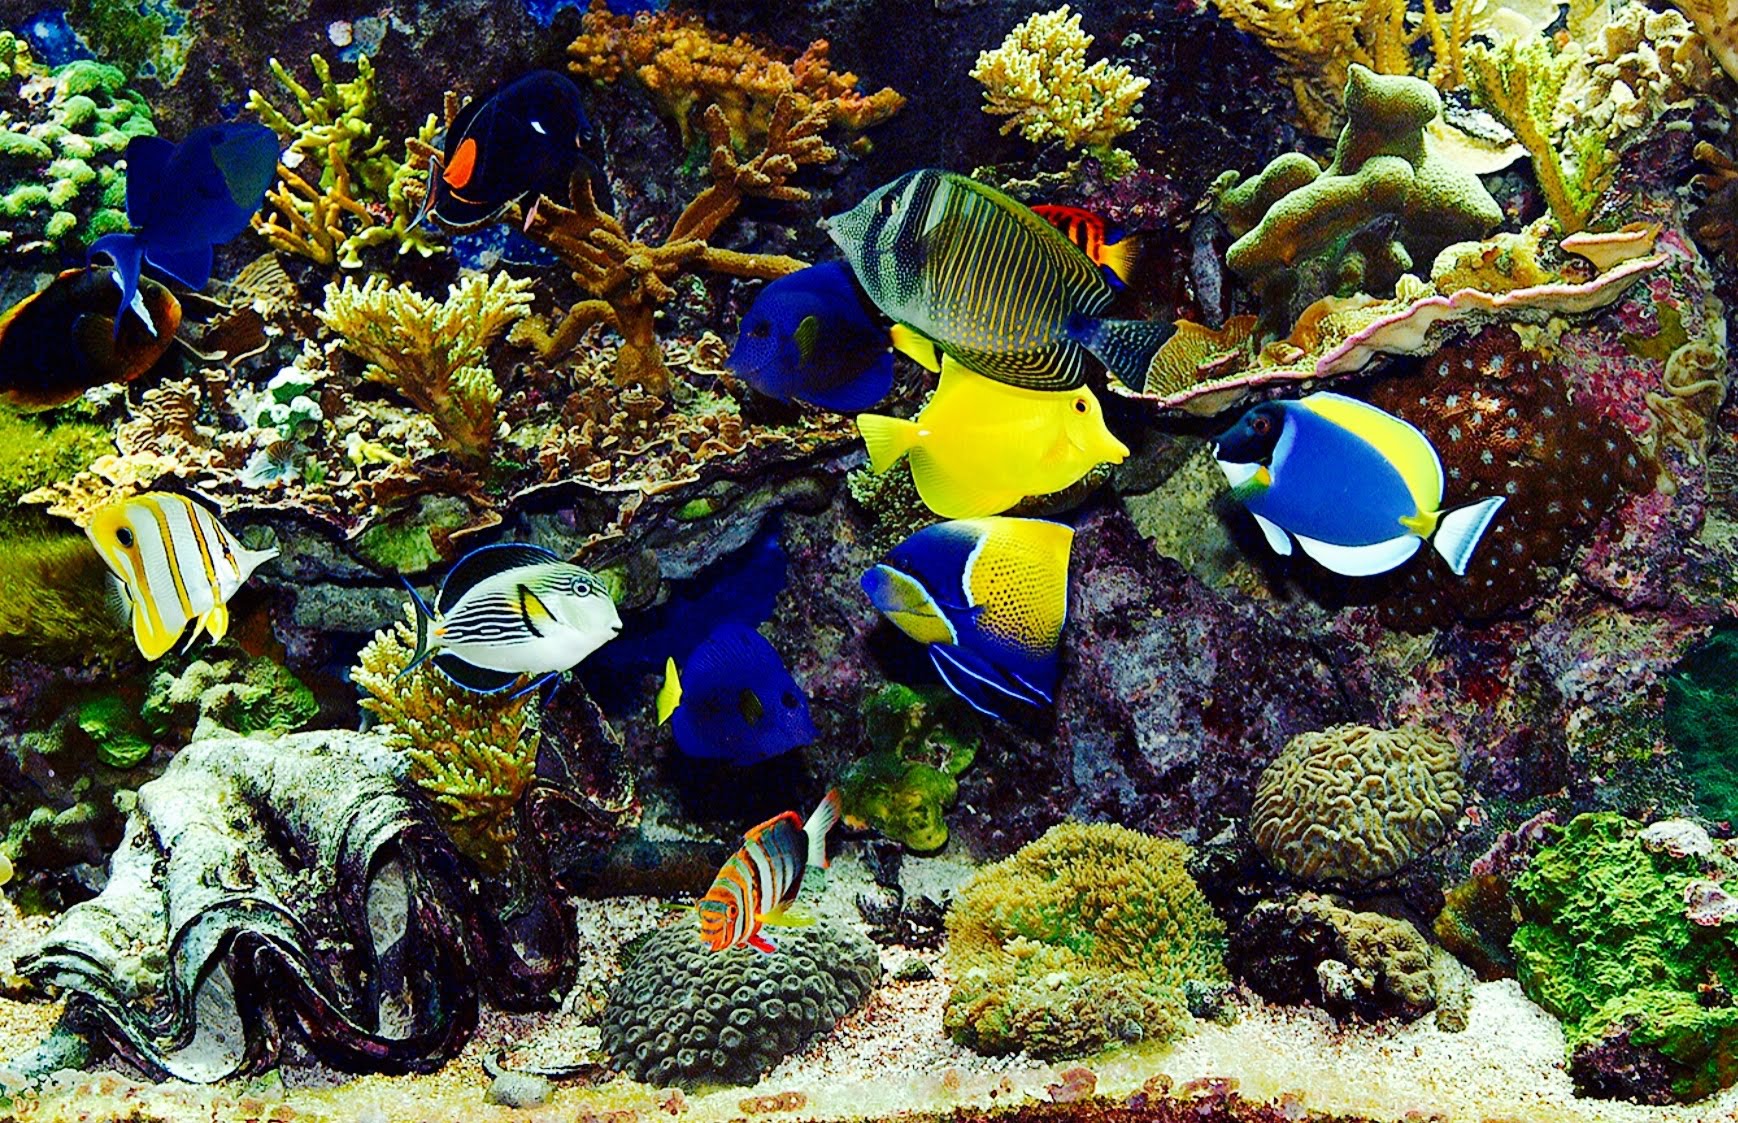  Tropical Fish Tanks: Choose Wisely: Essential Tips for Selecting Fish for Your Tropical Tank thumbnail